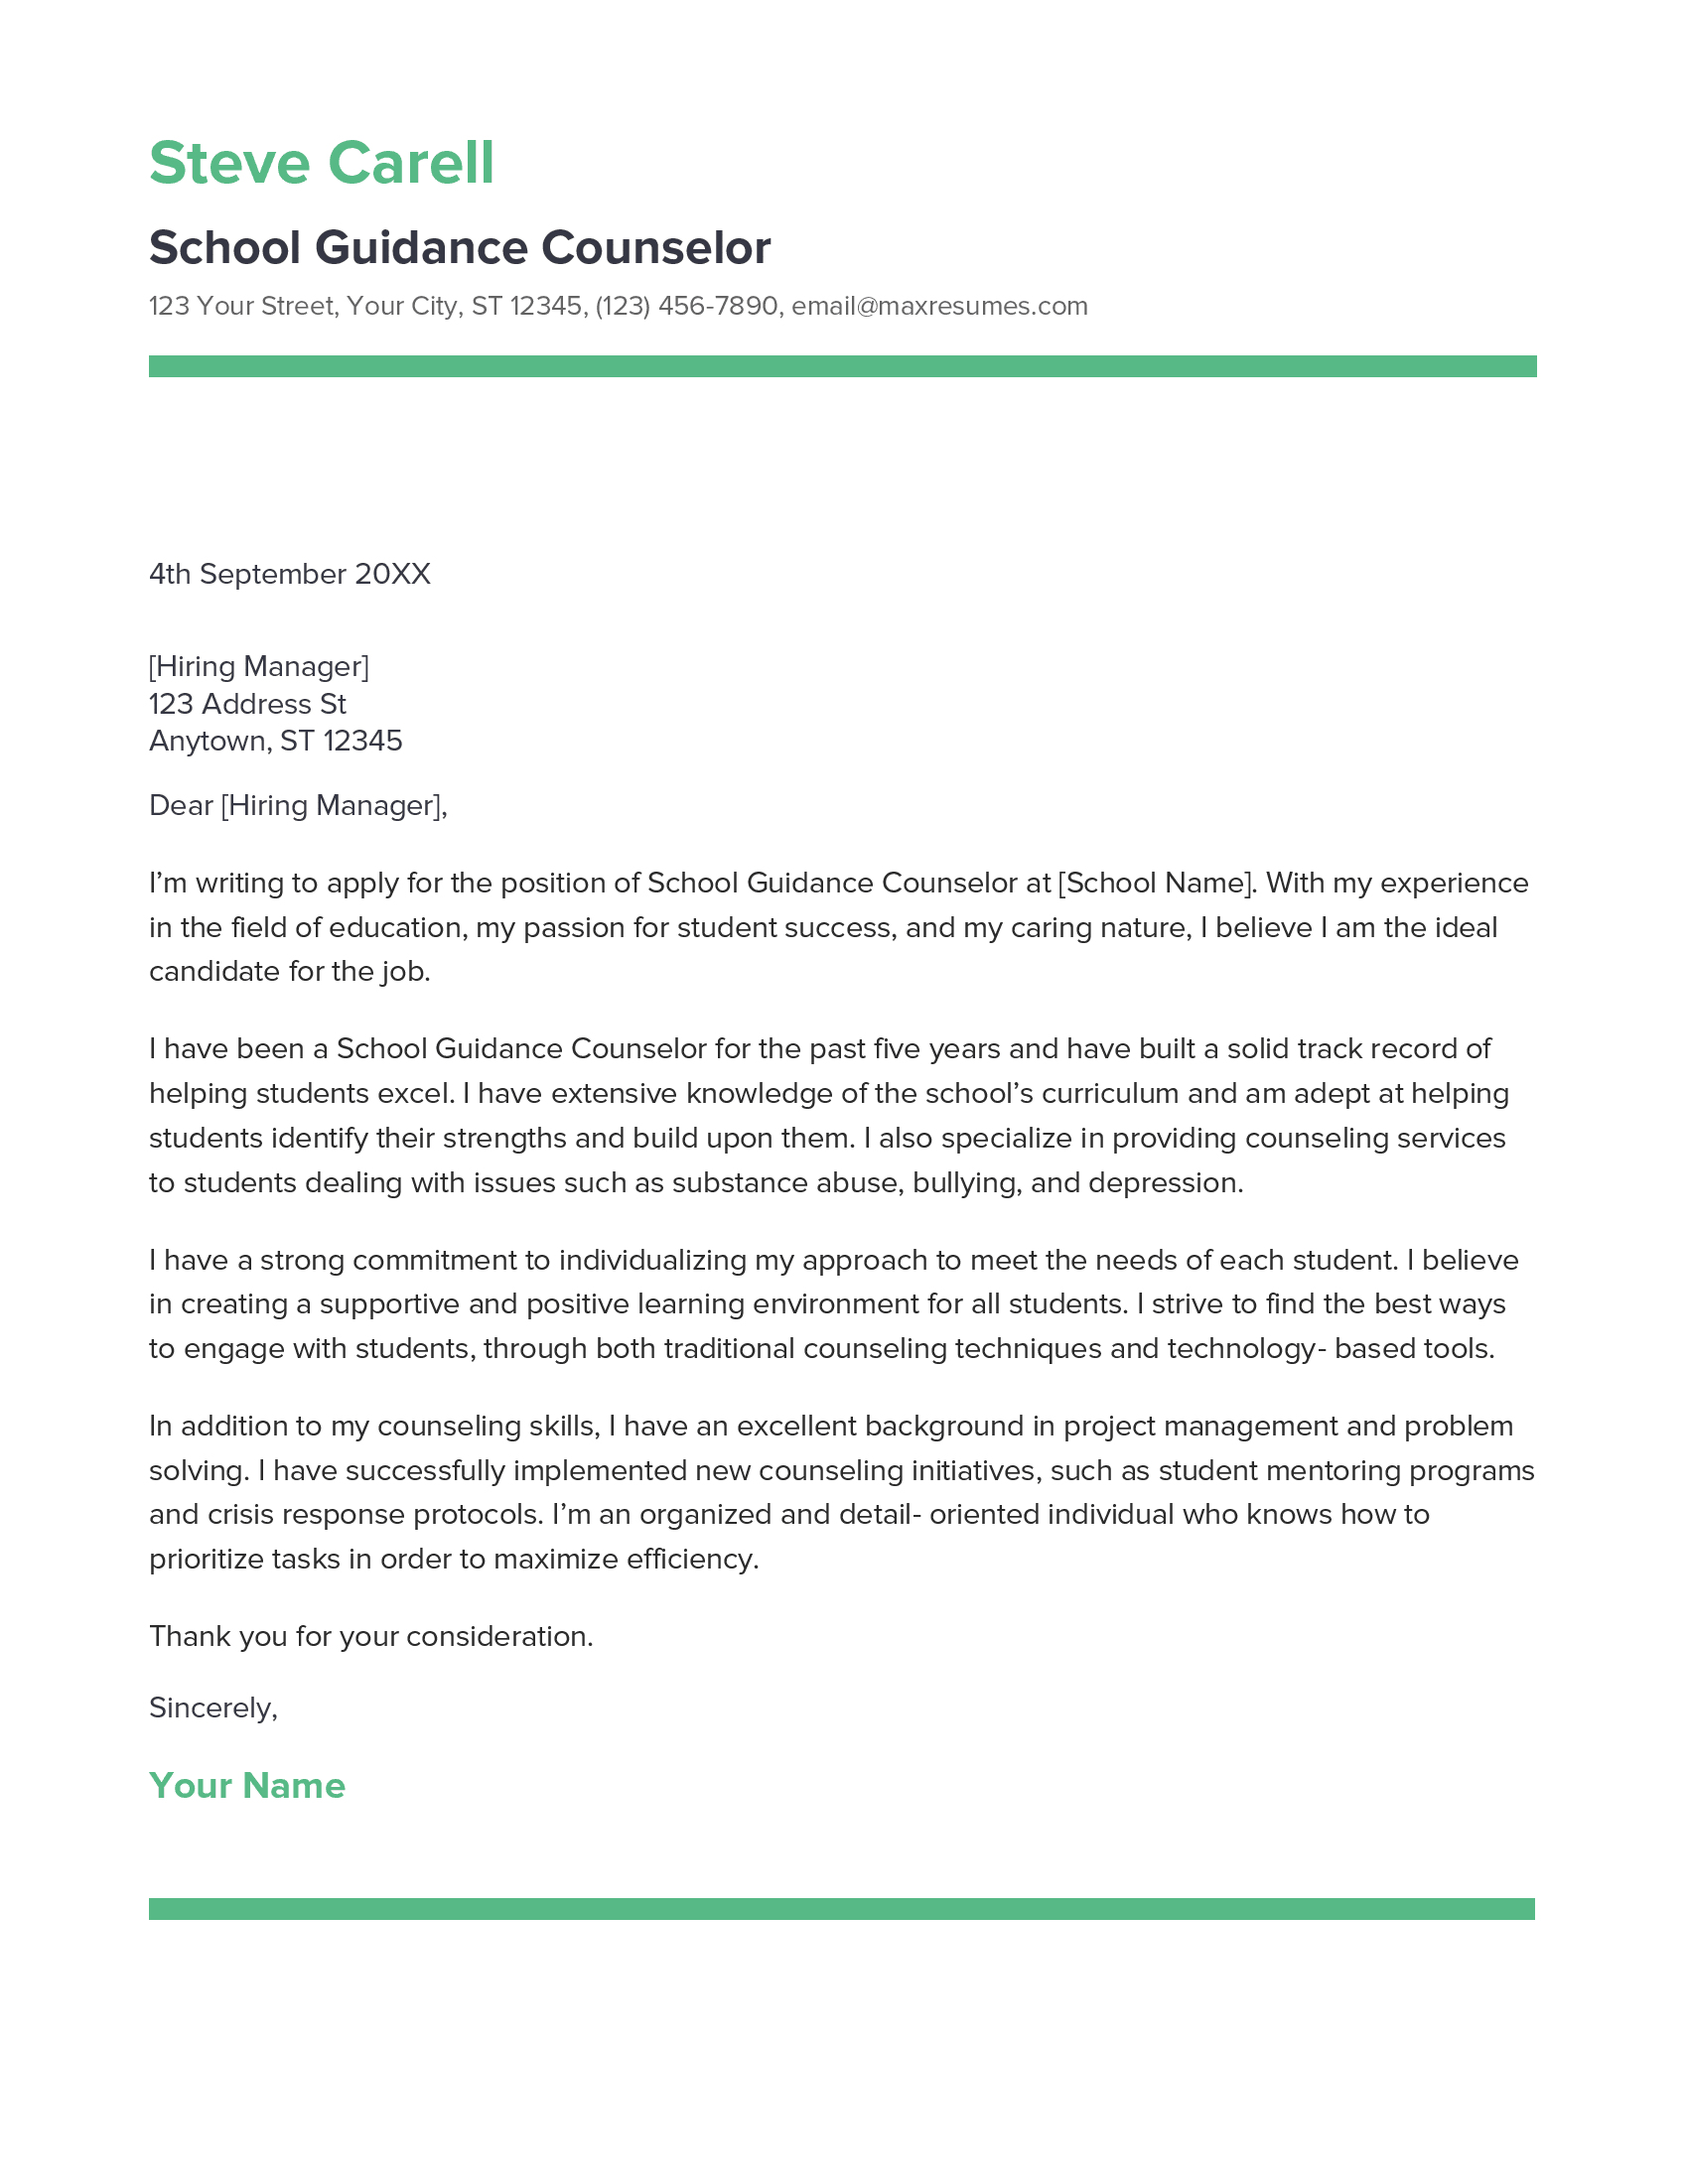 cover letter as guidance counselor